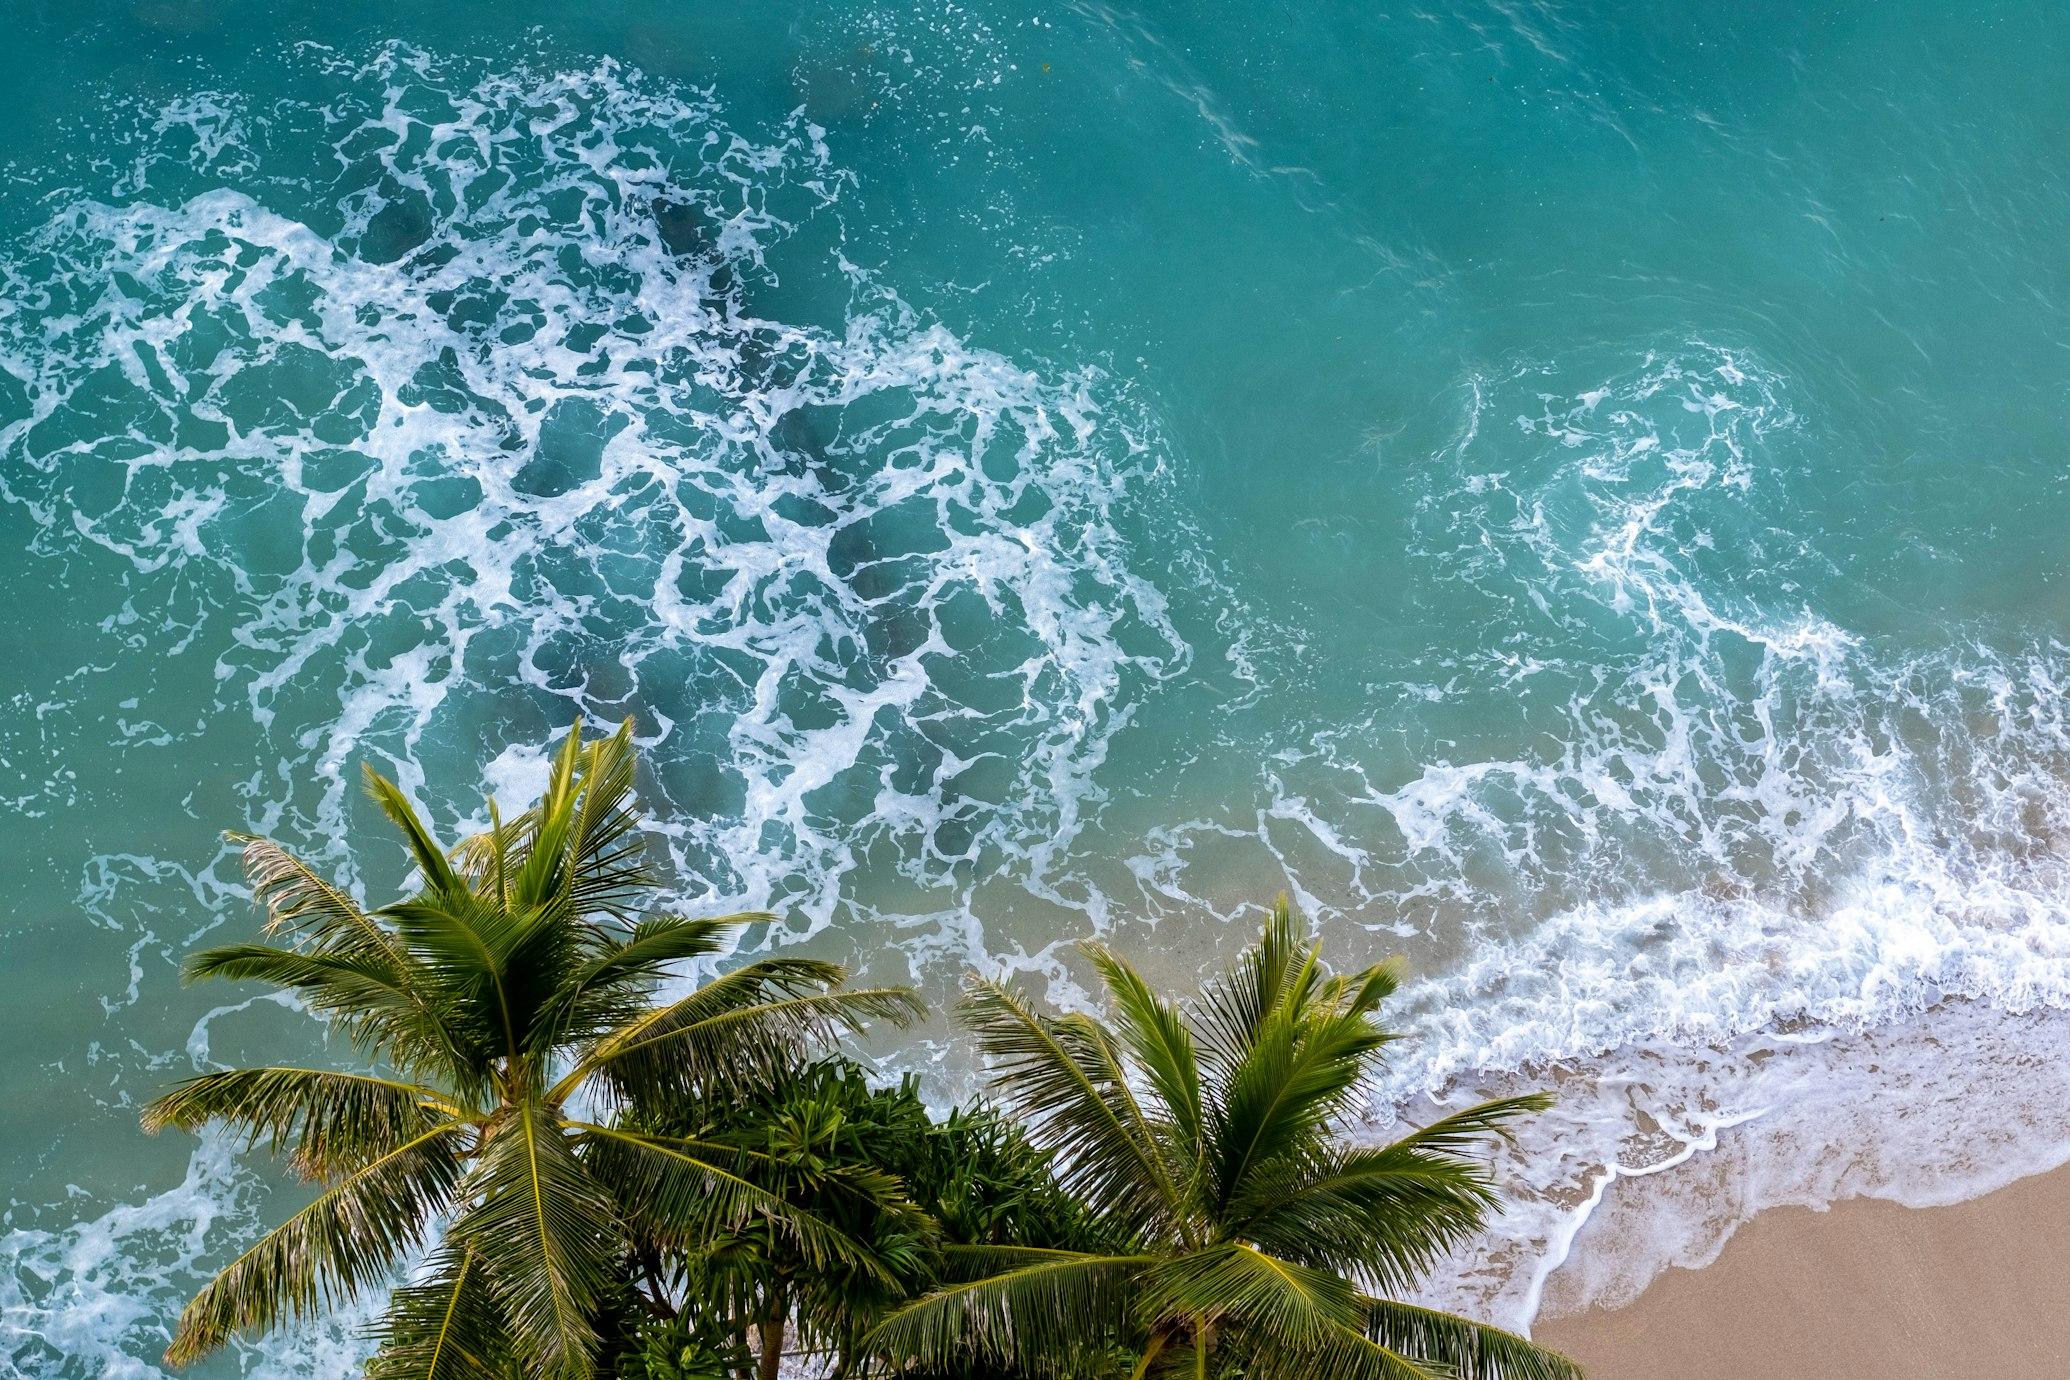 An overhead shot of the incoming waves with a palm tree shading the ocean.